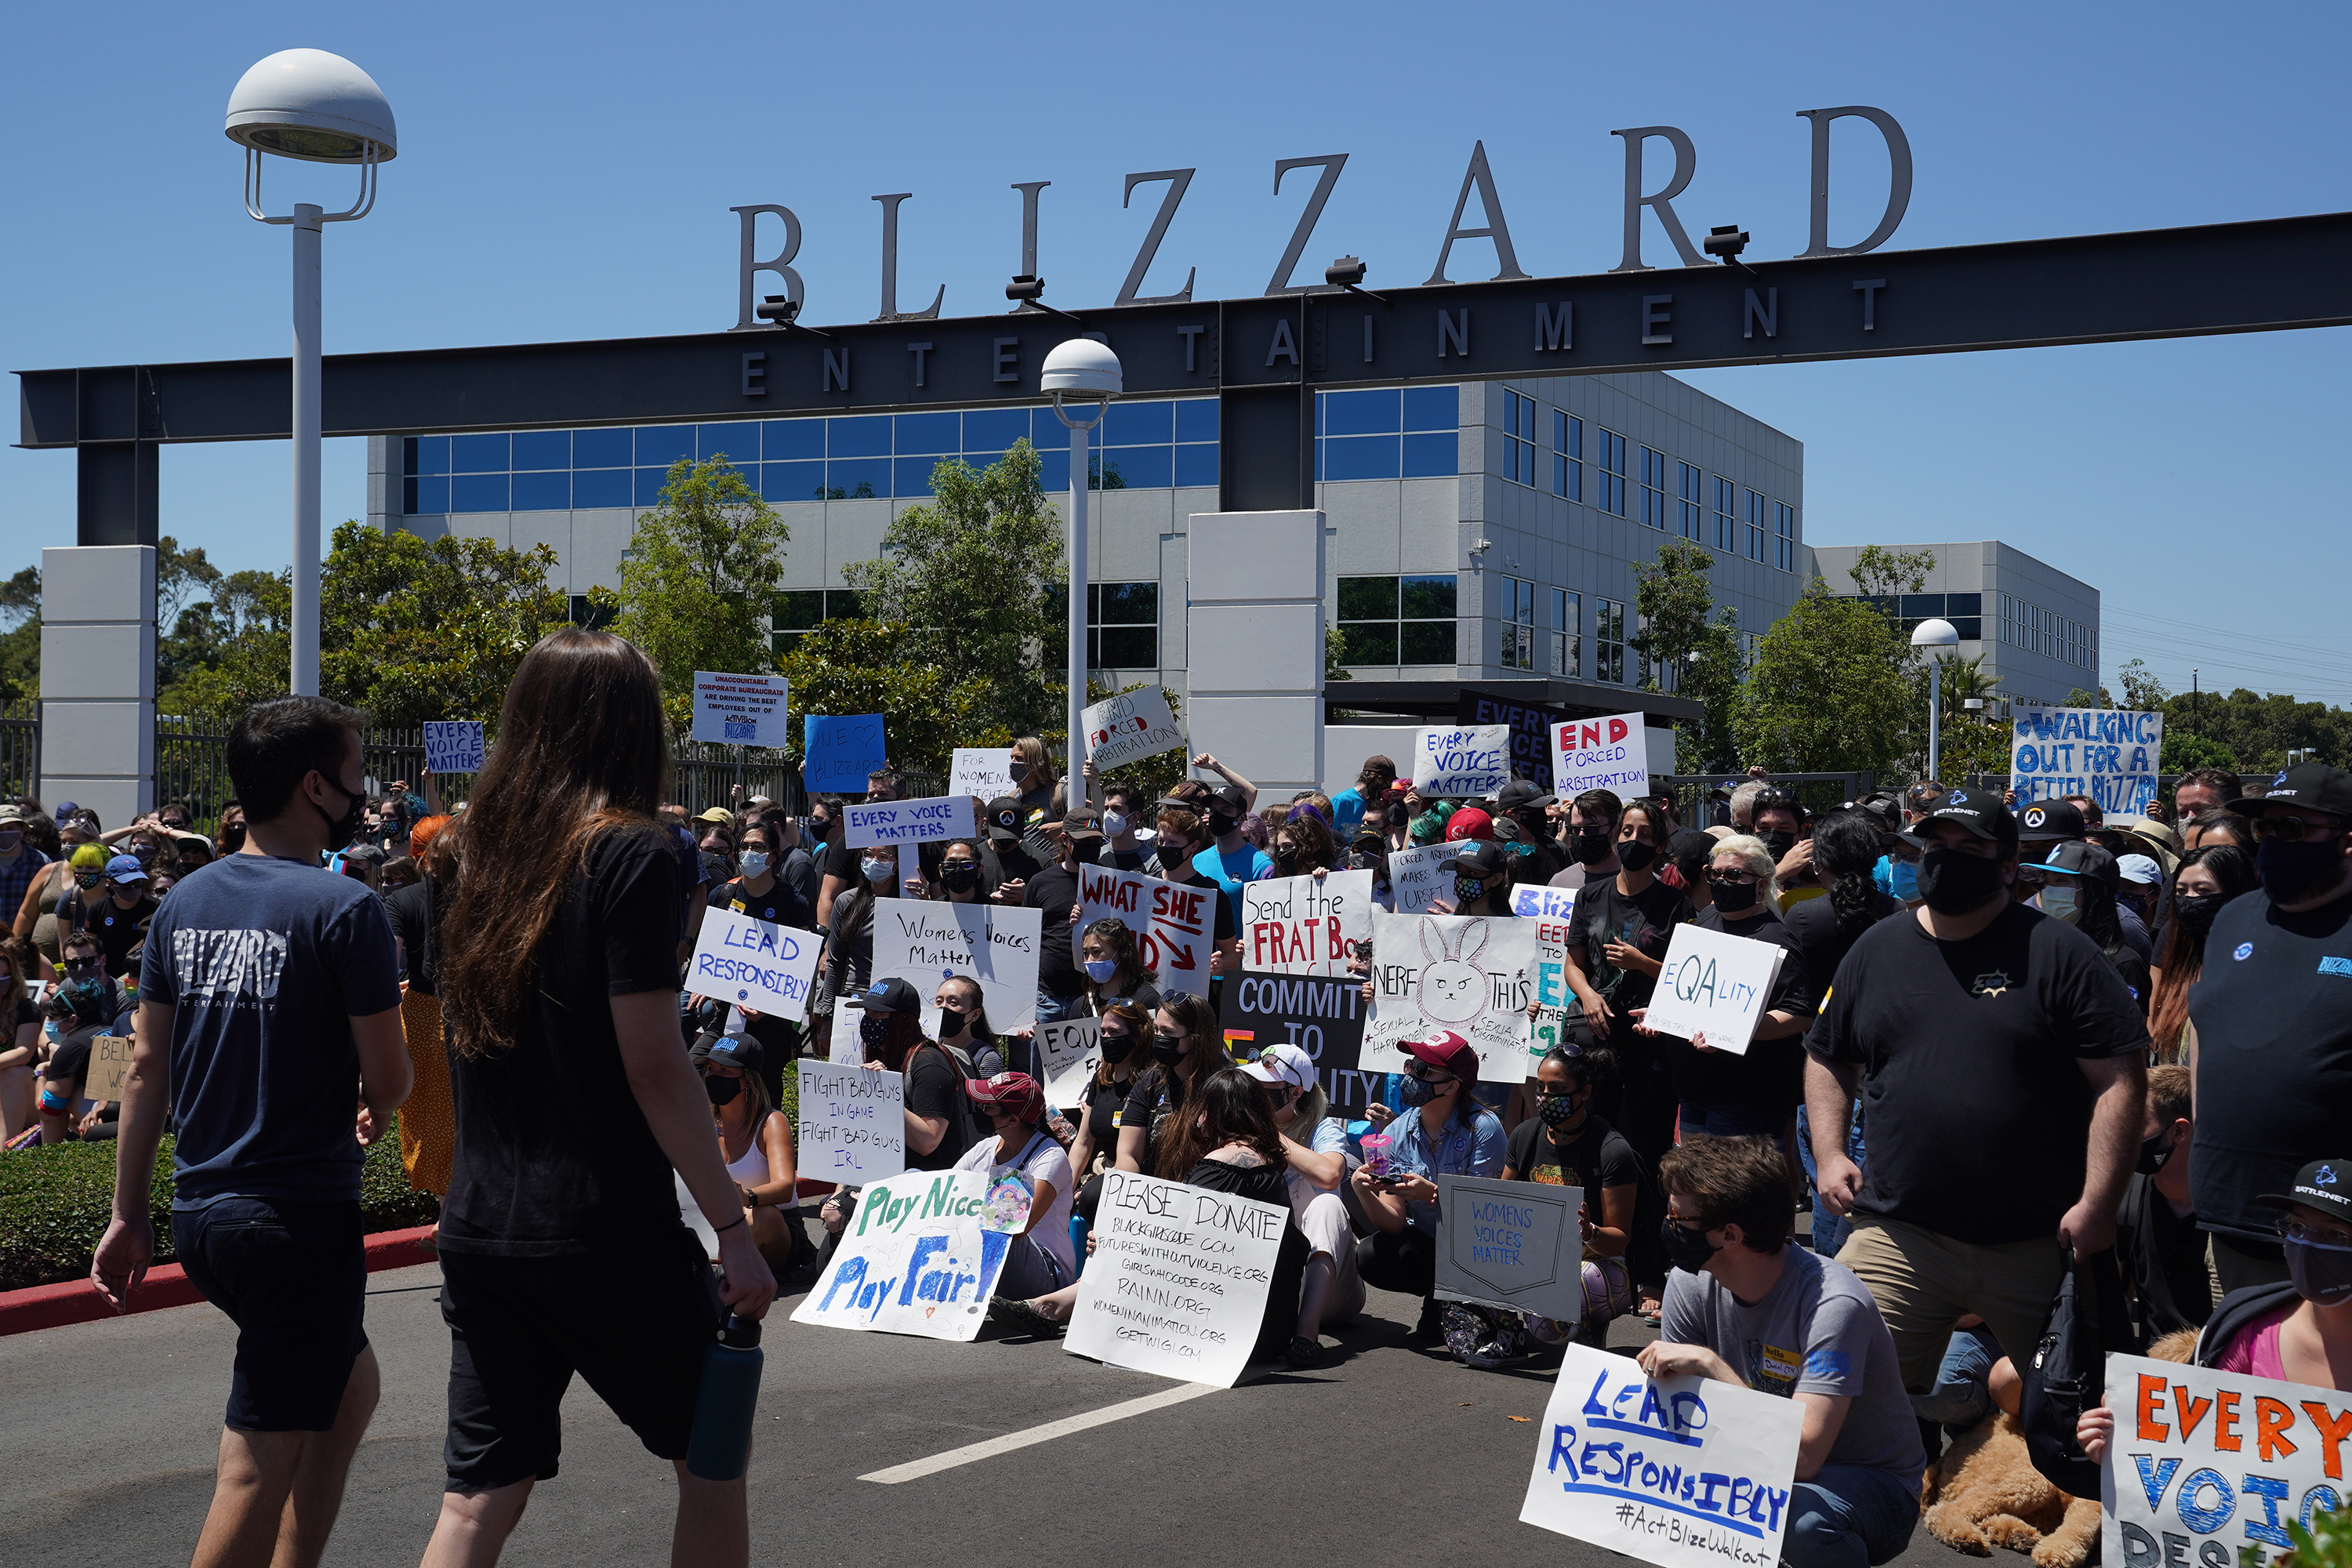  Activision Blizzard employees skeptical that executive who denied sexism problems can solve them 